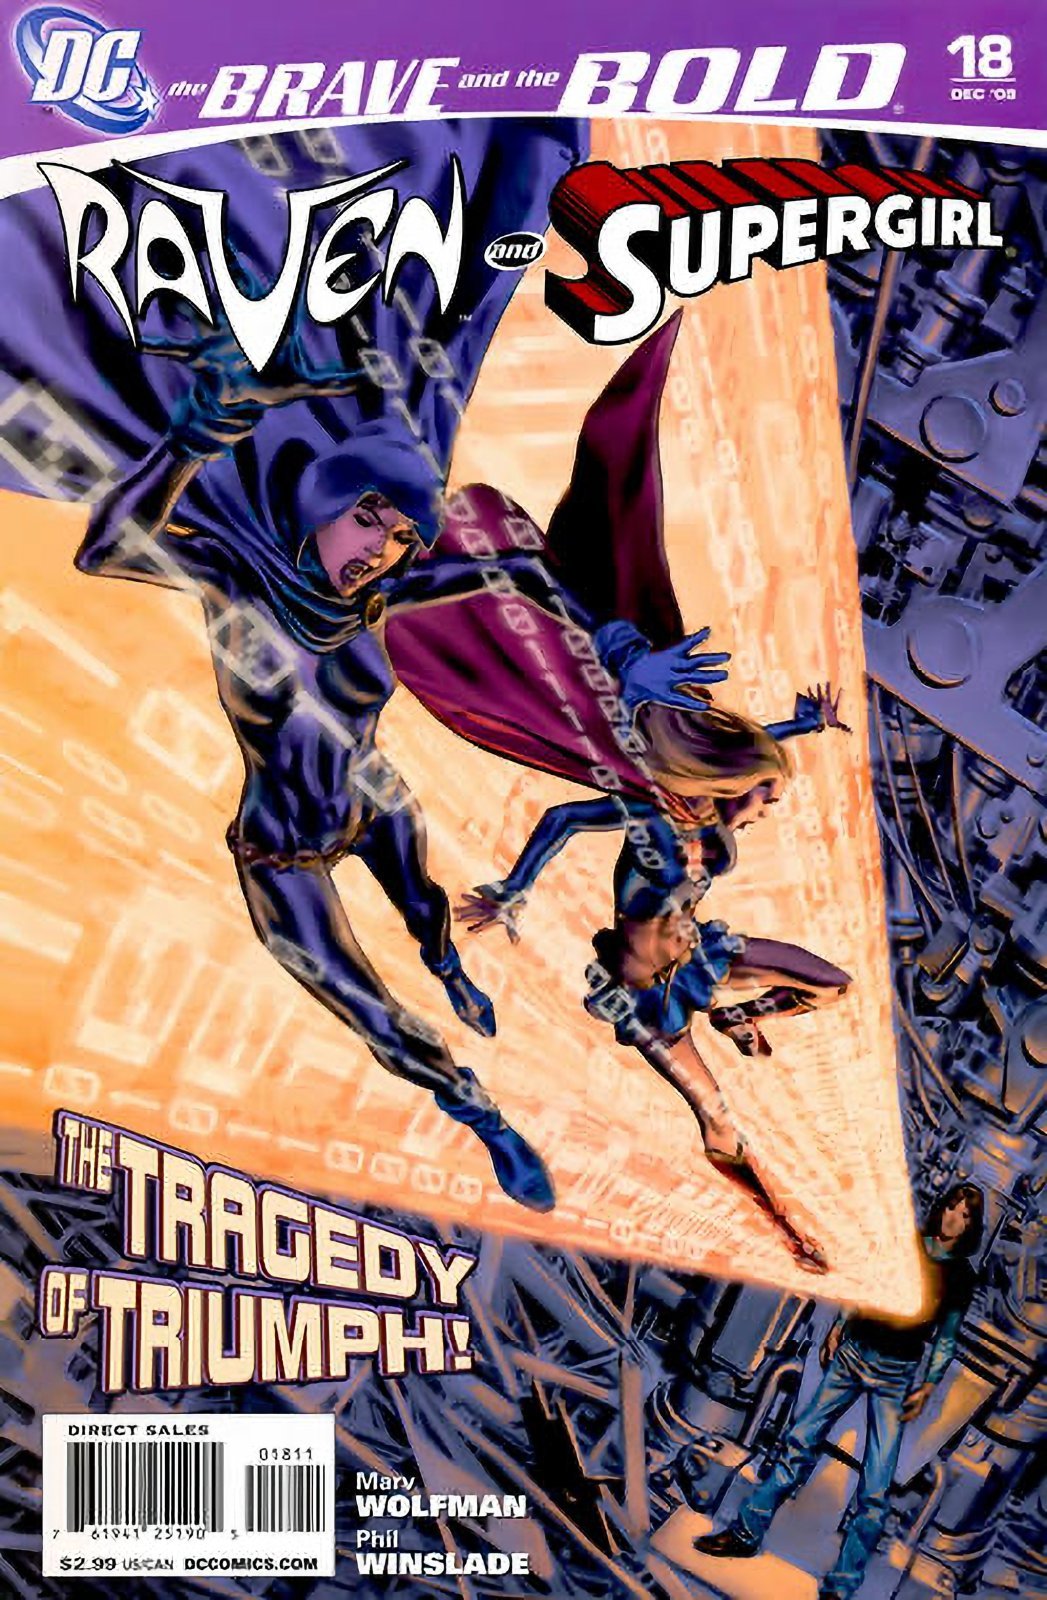 The Brave and the Bold #18 (2007-2010) DC Comics